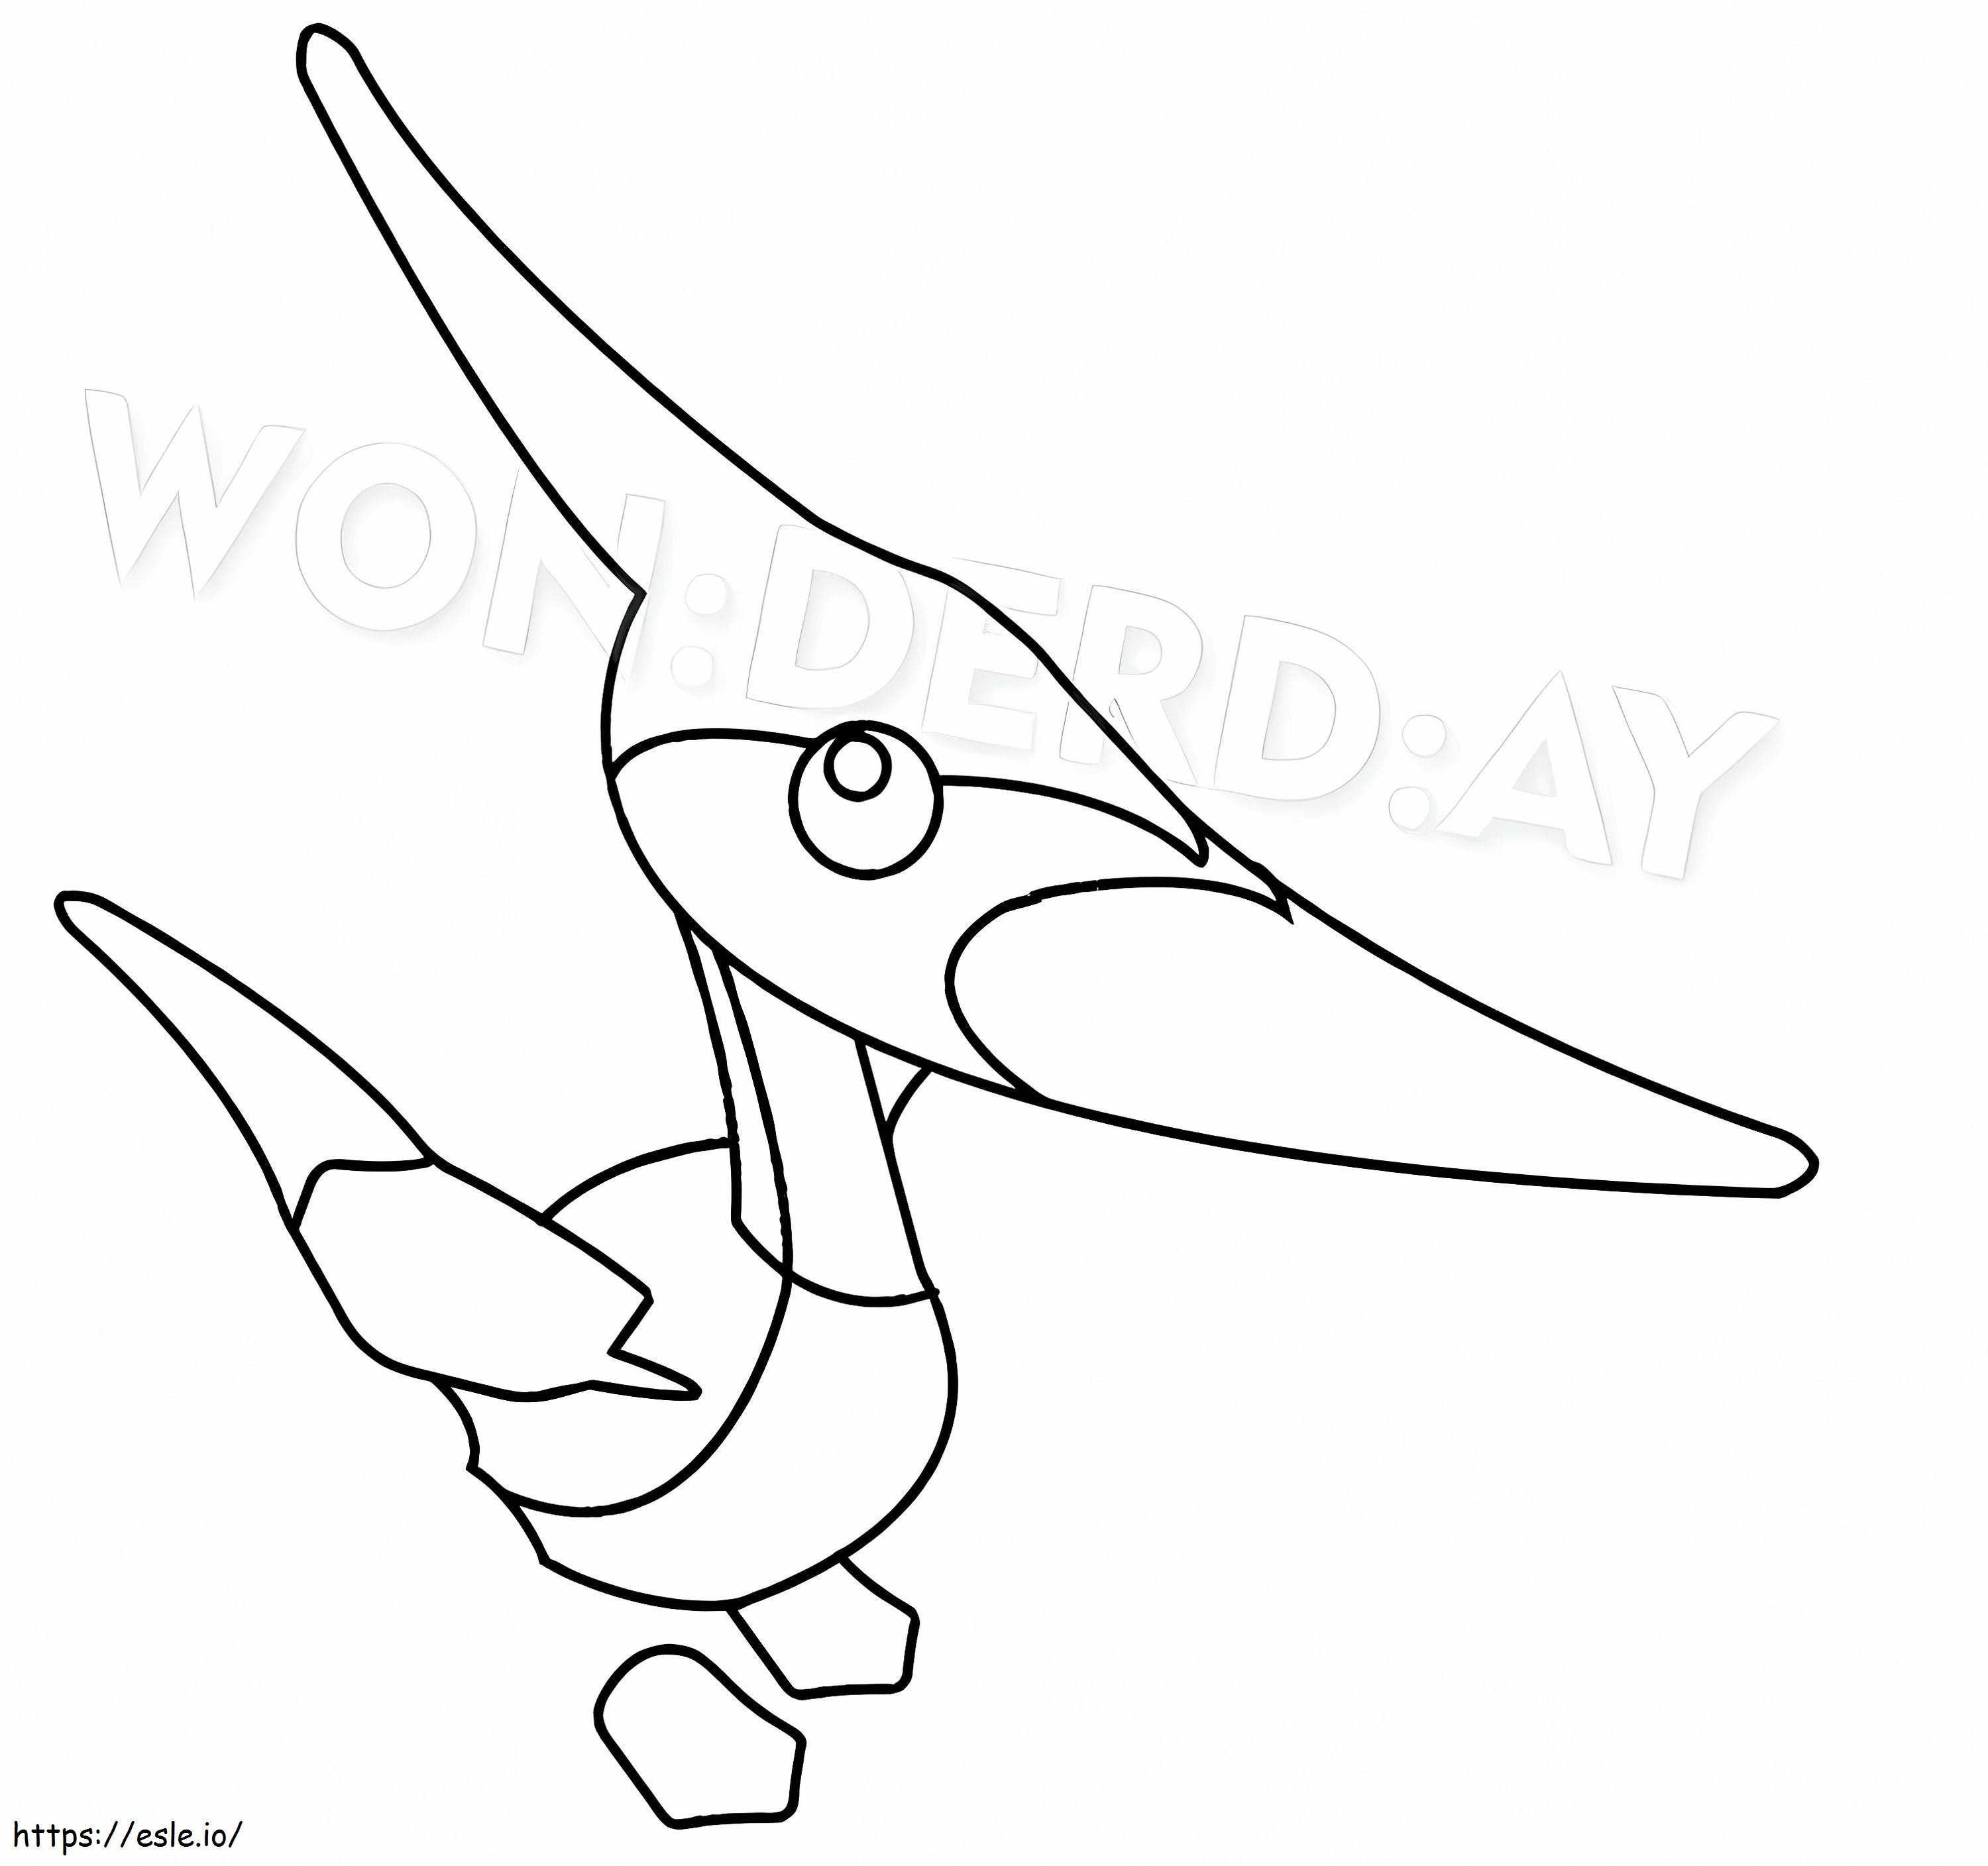 Pterodactyl Adopt Me coloring page